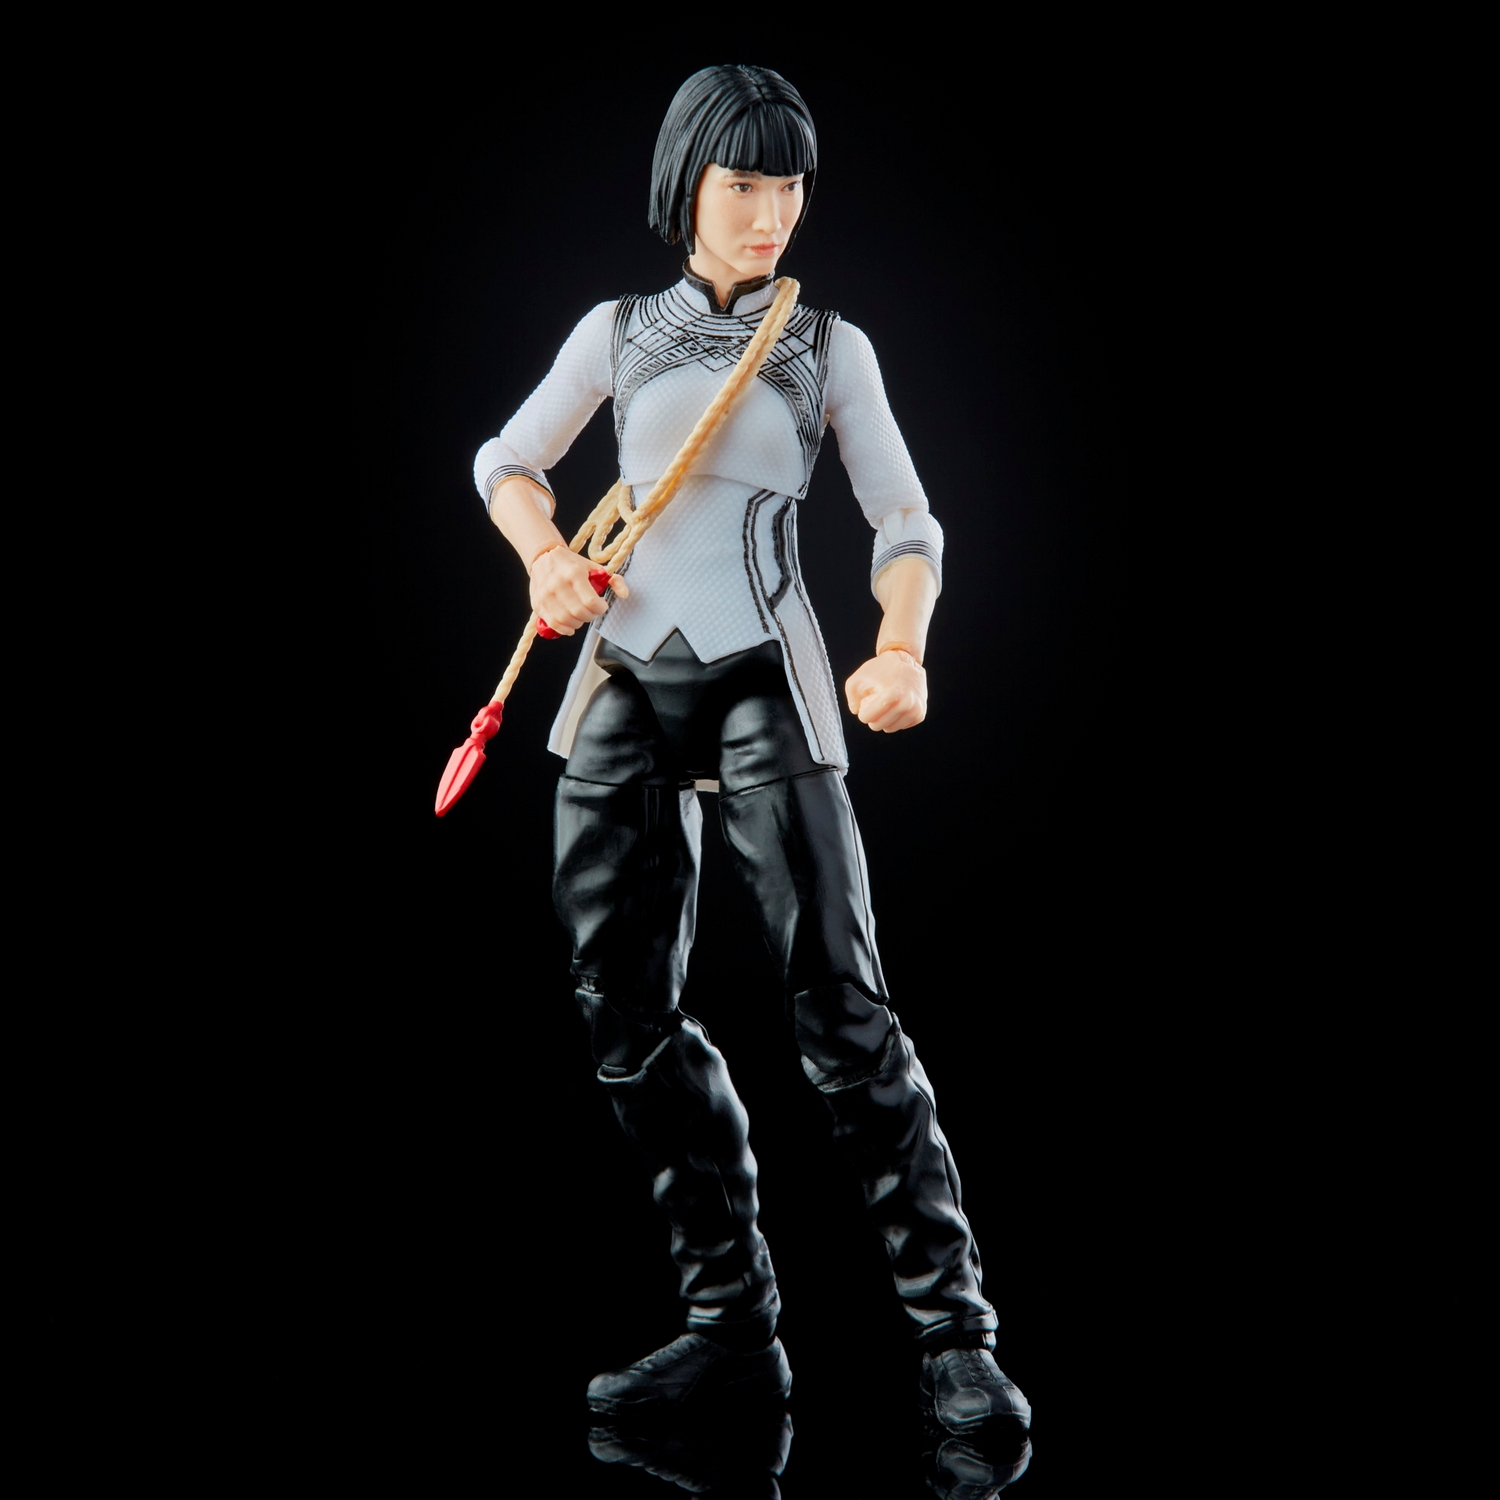 MARVEL LEGENDS SERIES 6-INCH SHANG-CHI AND THE LEGEND OF THE TEN RINGS - Xialing oop1.jpg